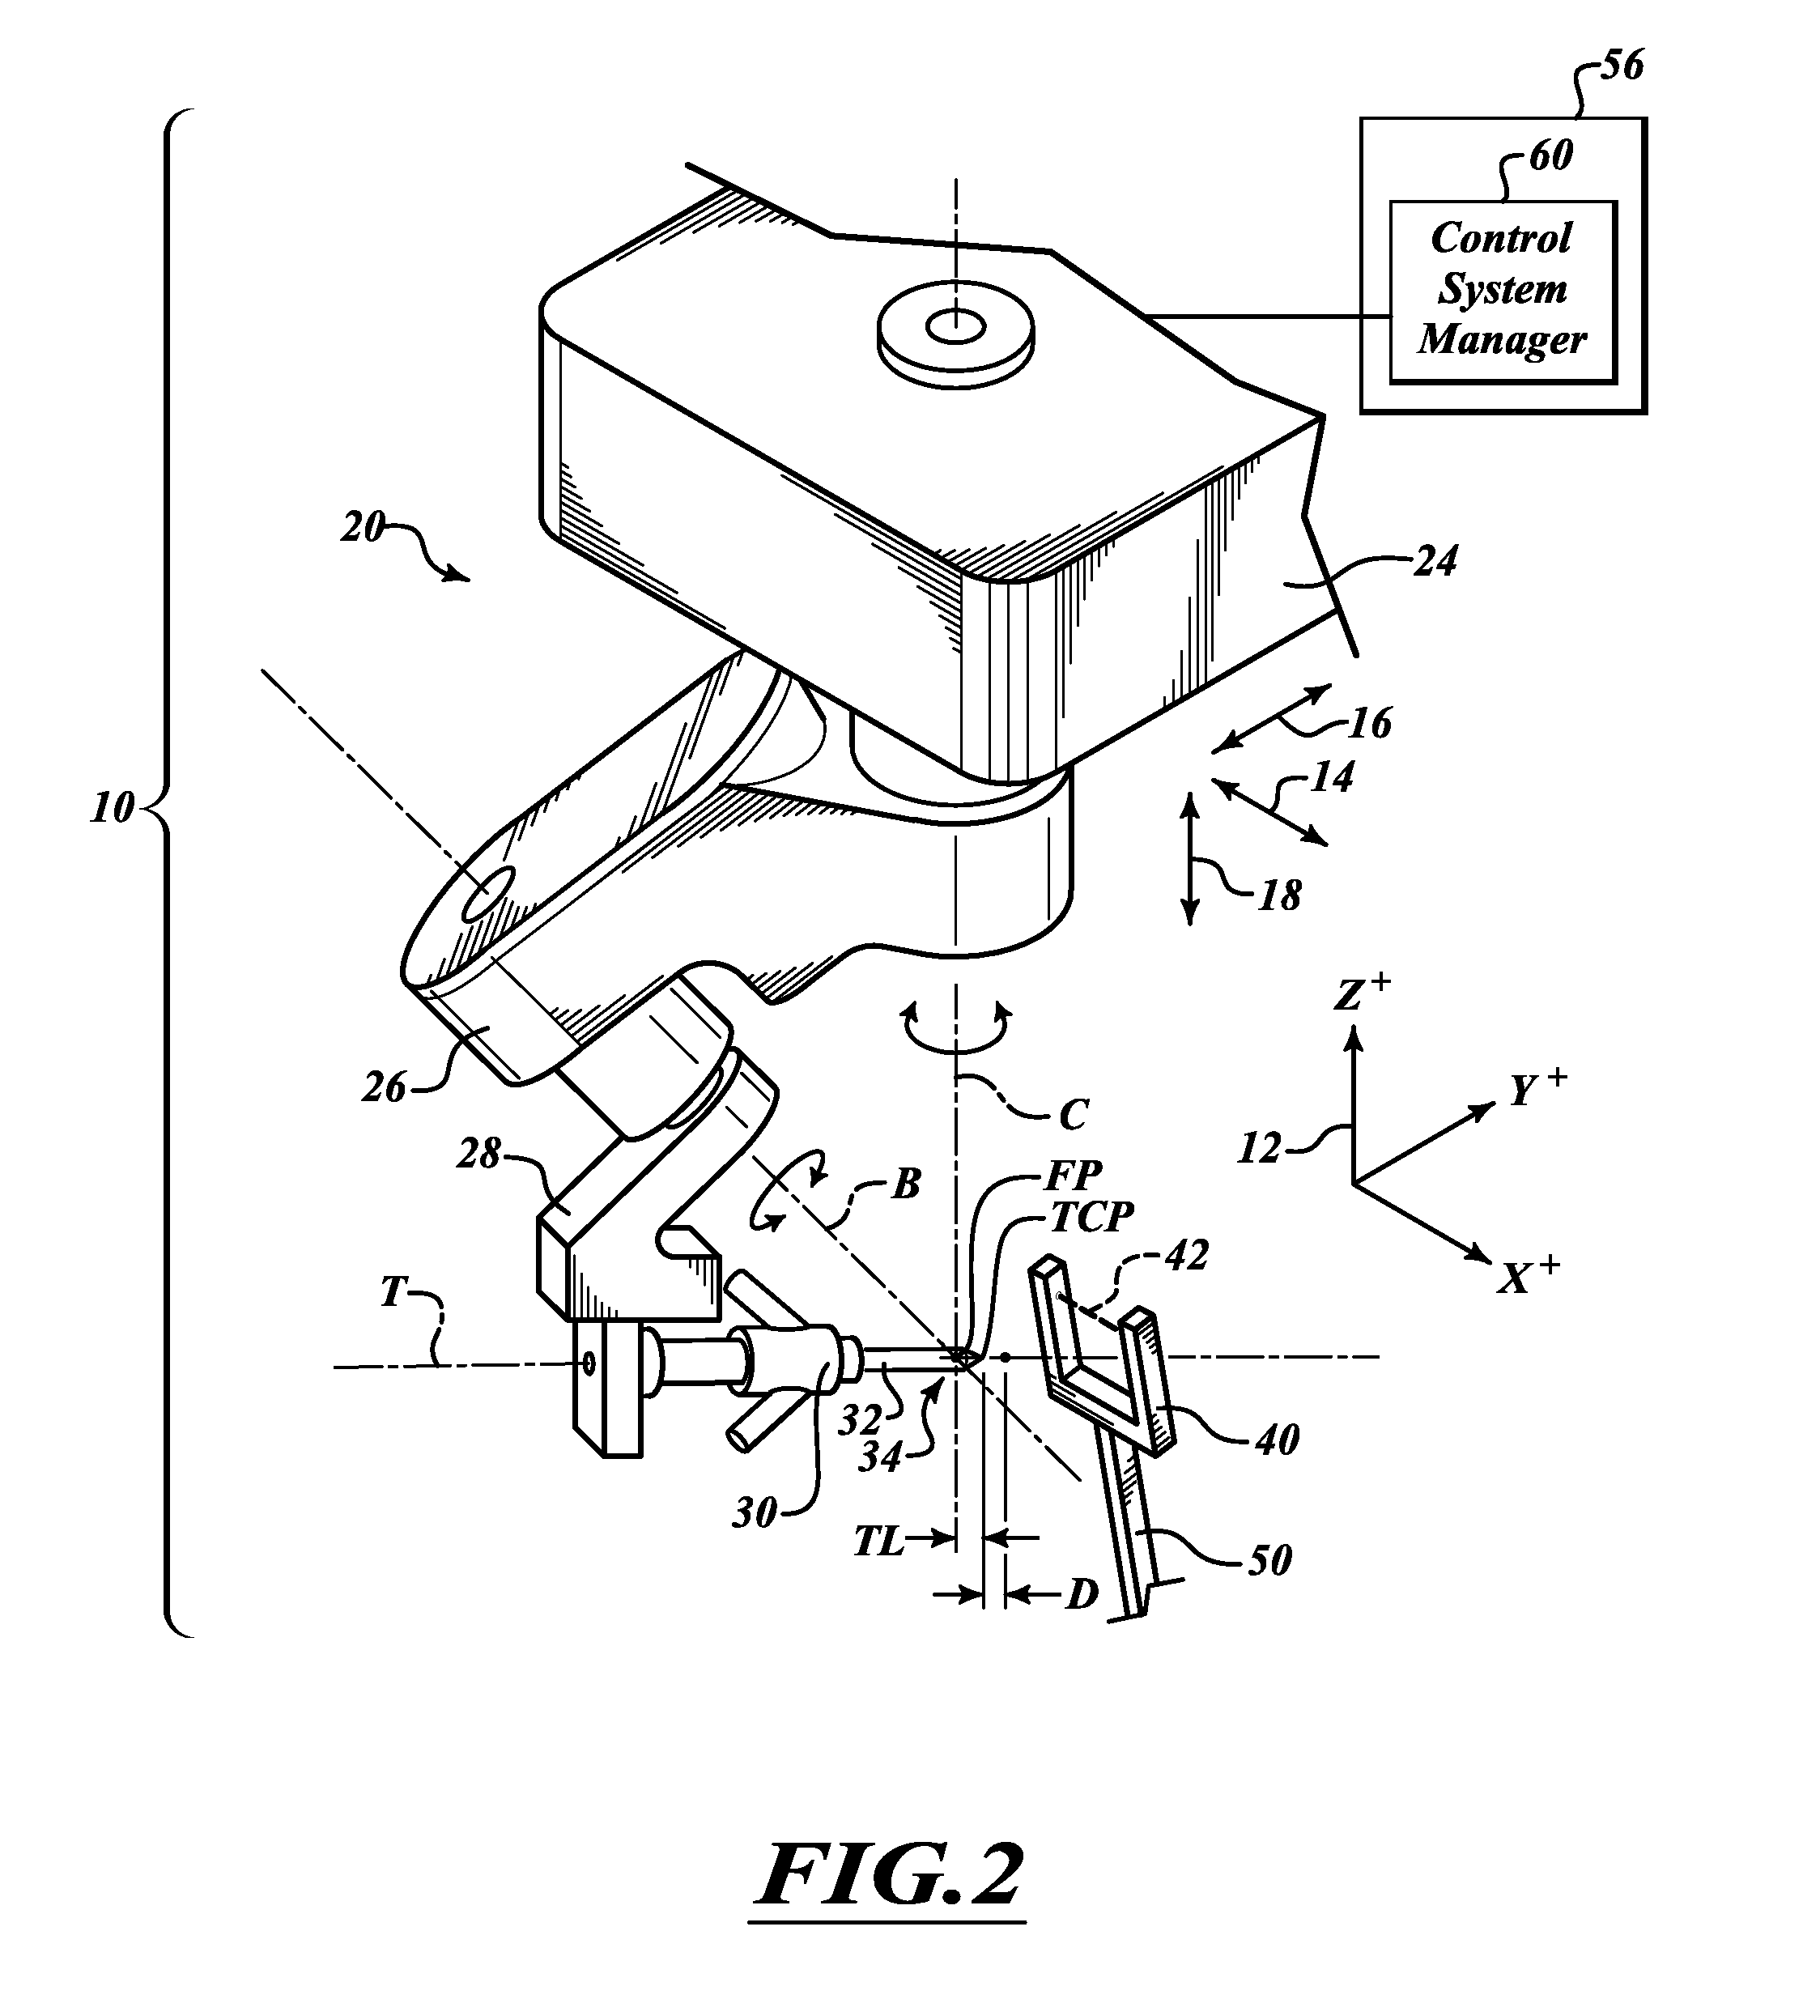 System and method for tool testing and alignment